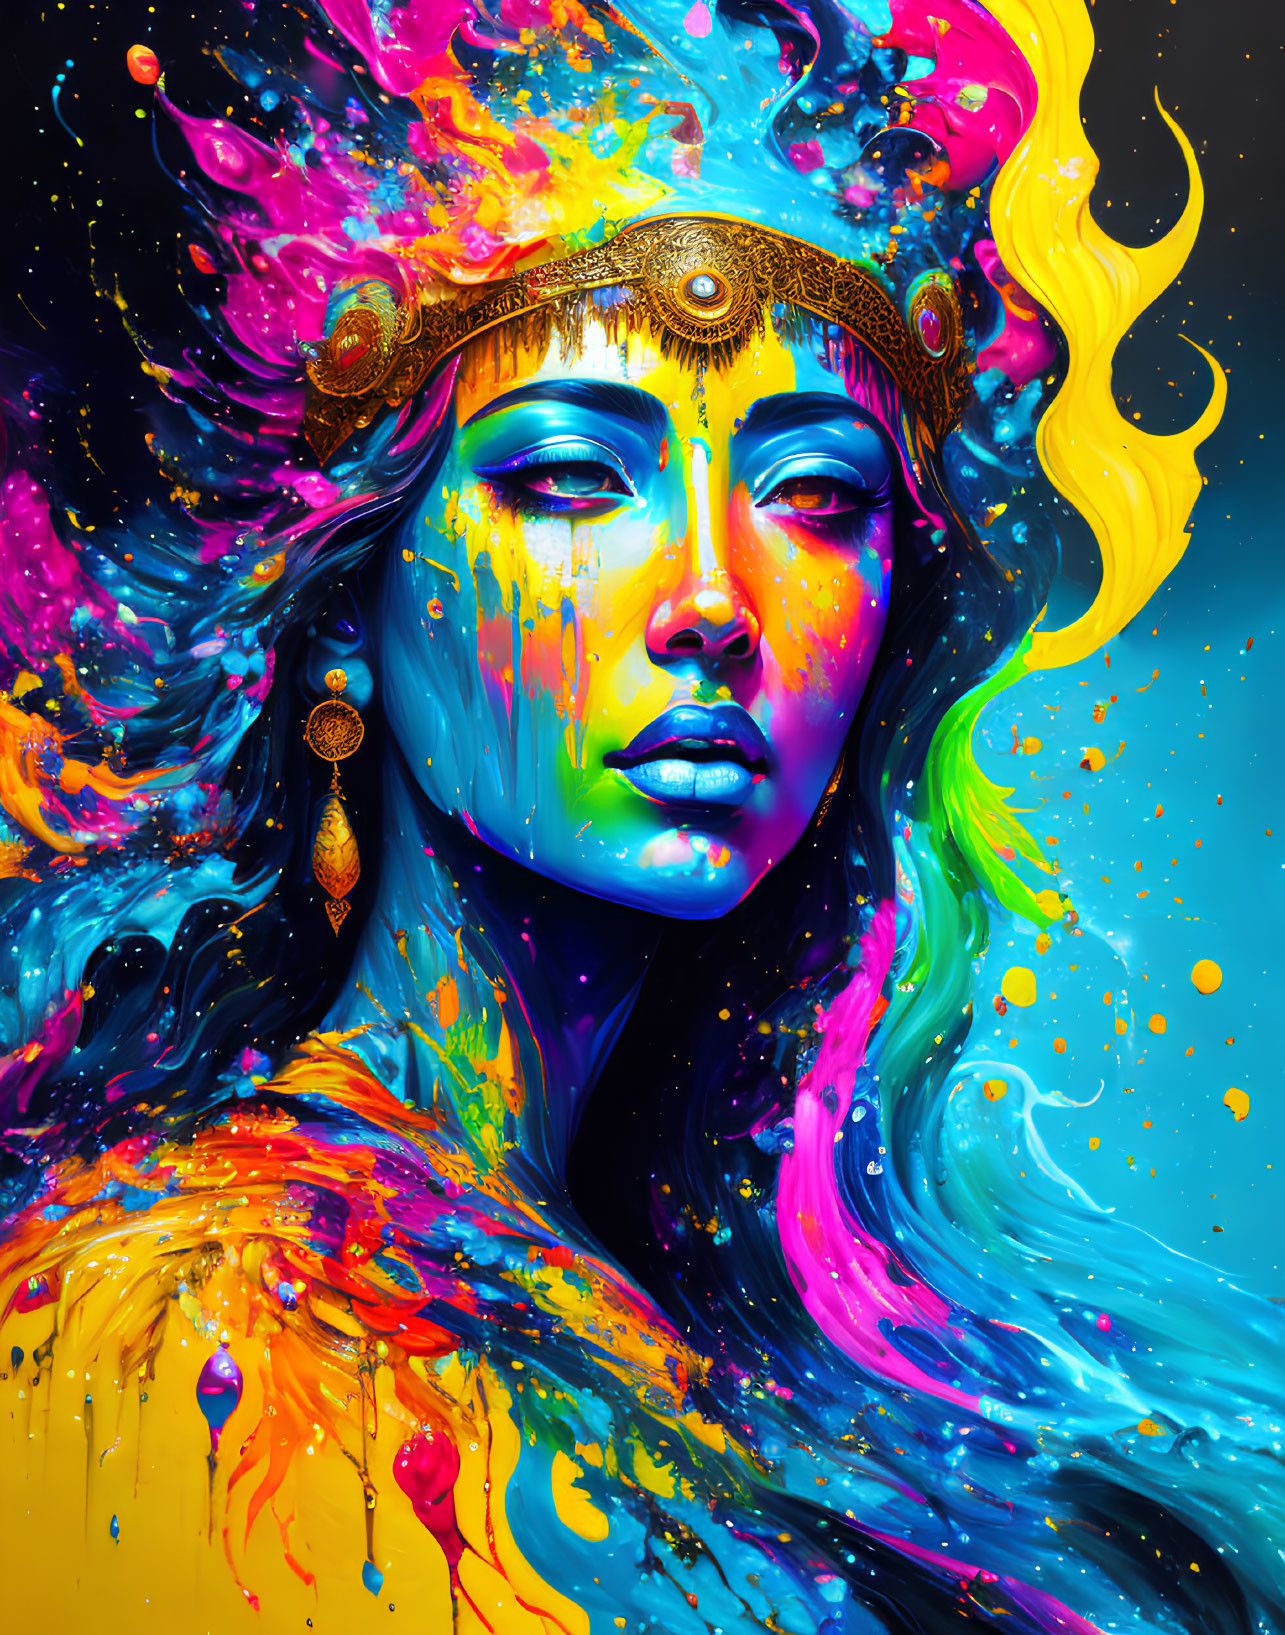 Colorful Abstract Portrait of Woman with Golden Head Jewelry